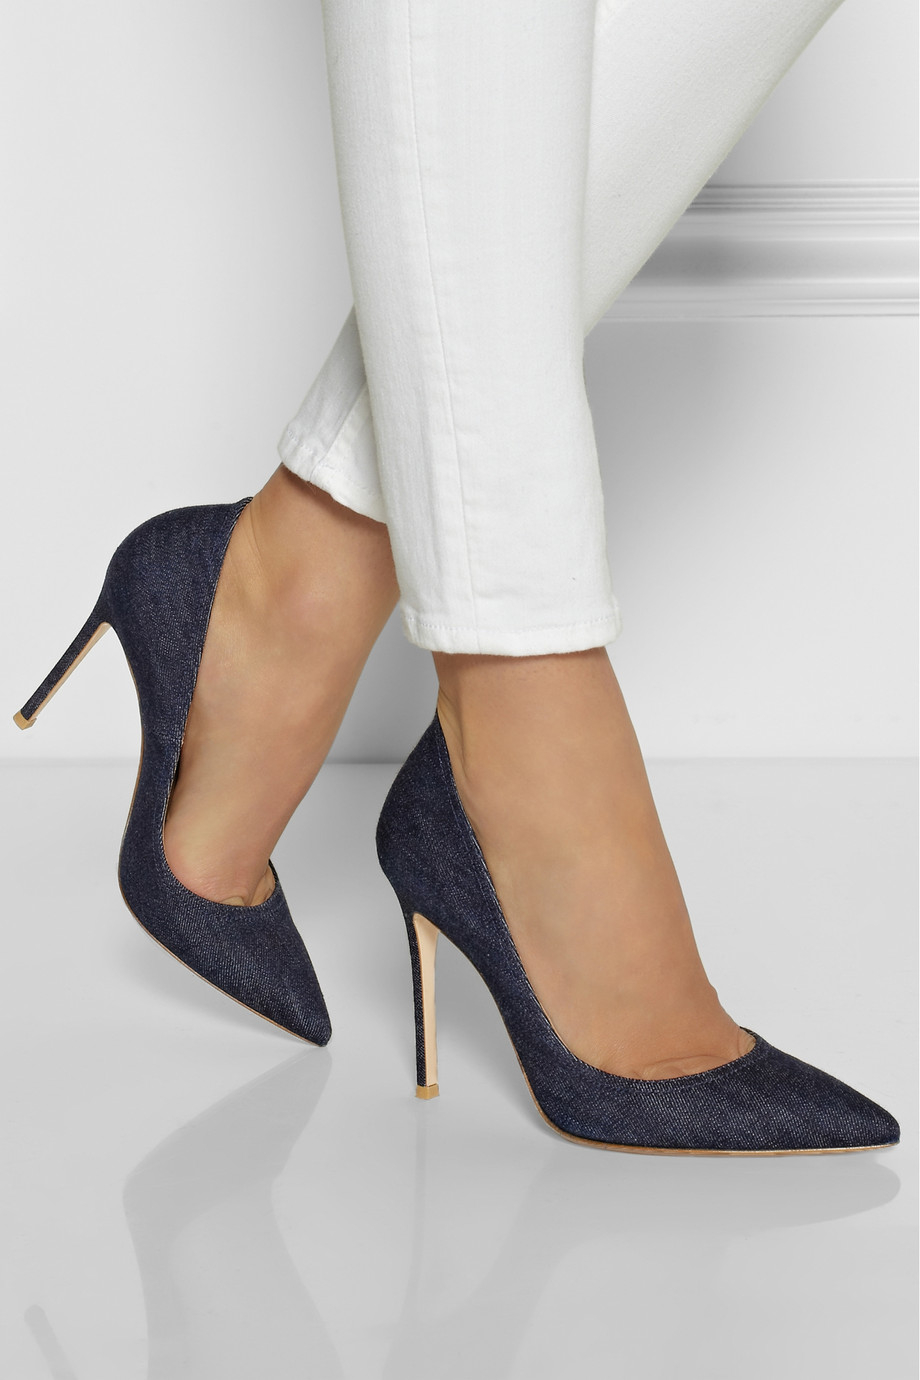 Lyst Gianvito rossi Pointed Toe Denim Pumps in Blue